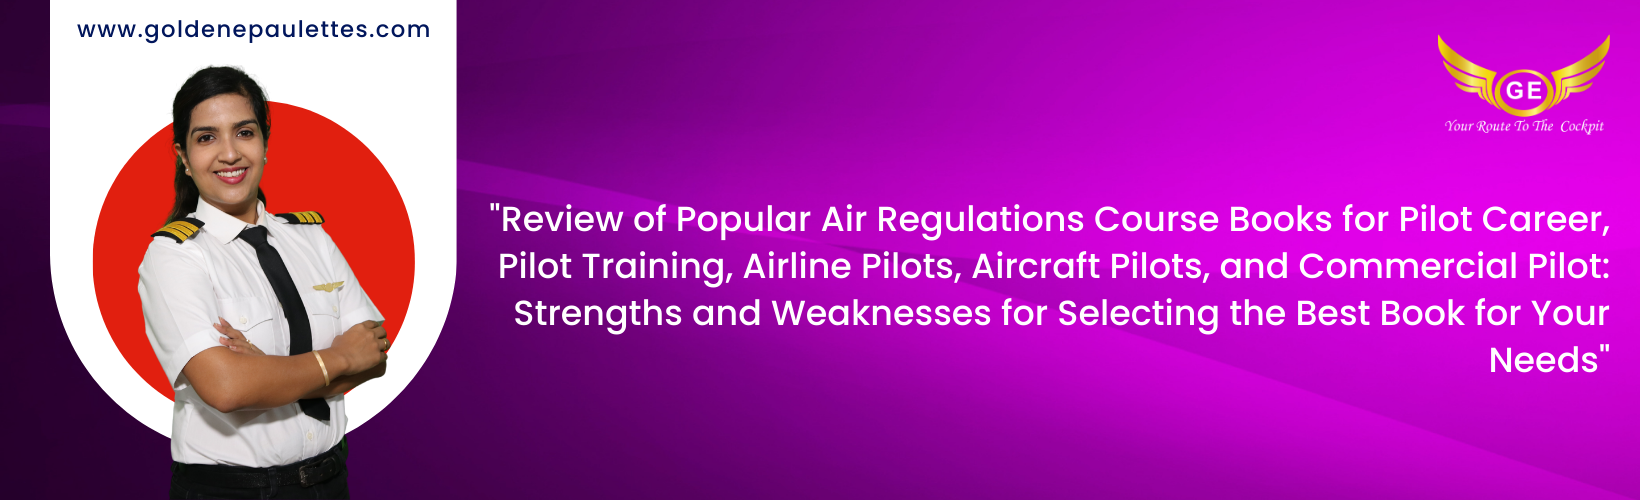 Review of Popular Air Regulations Course Books